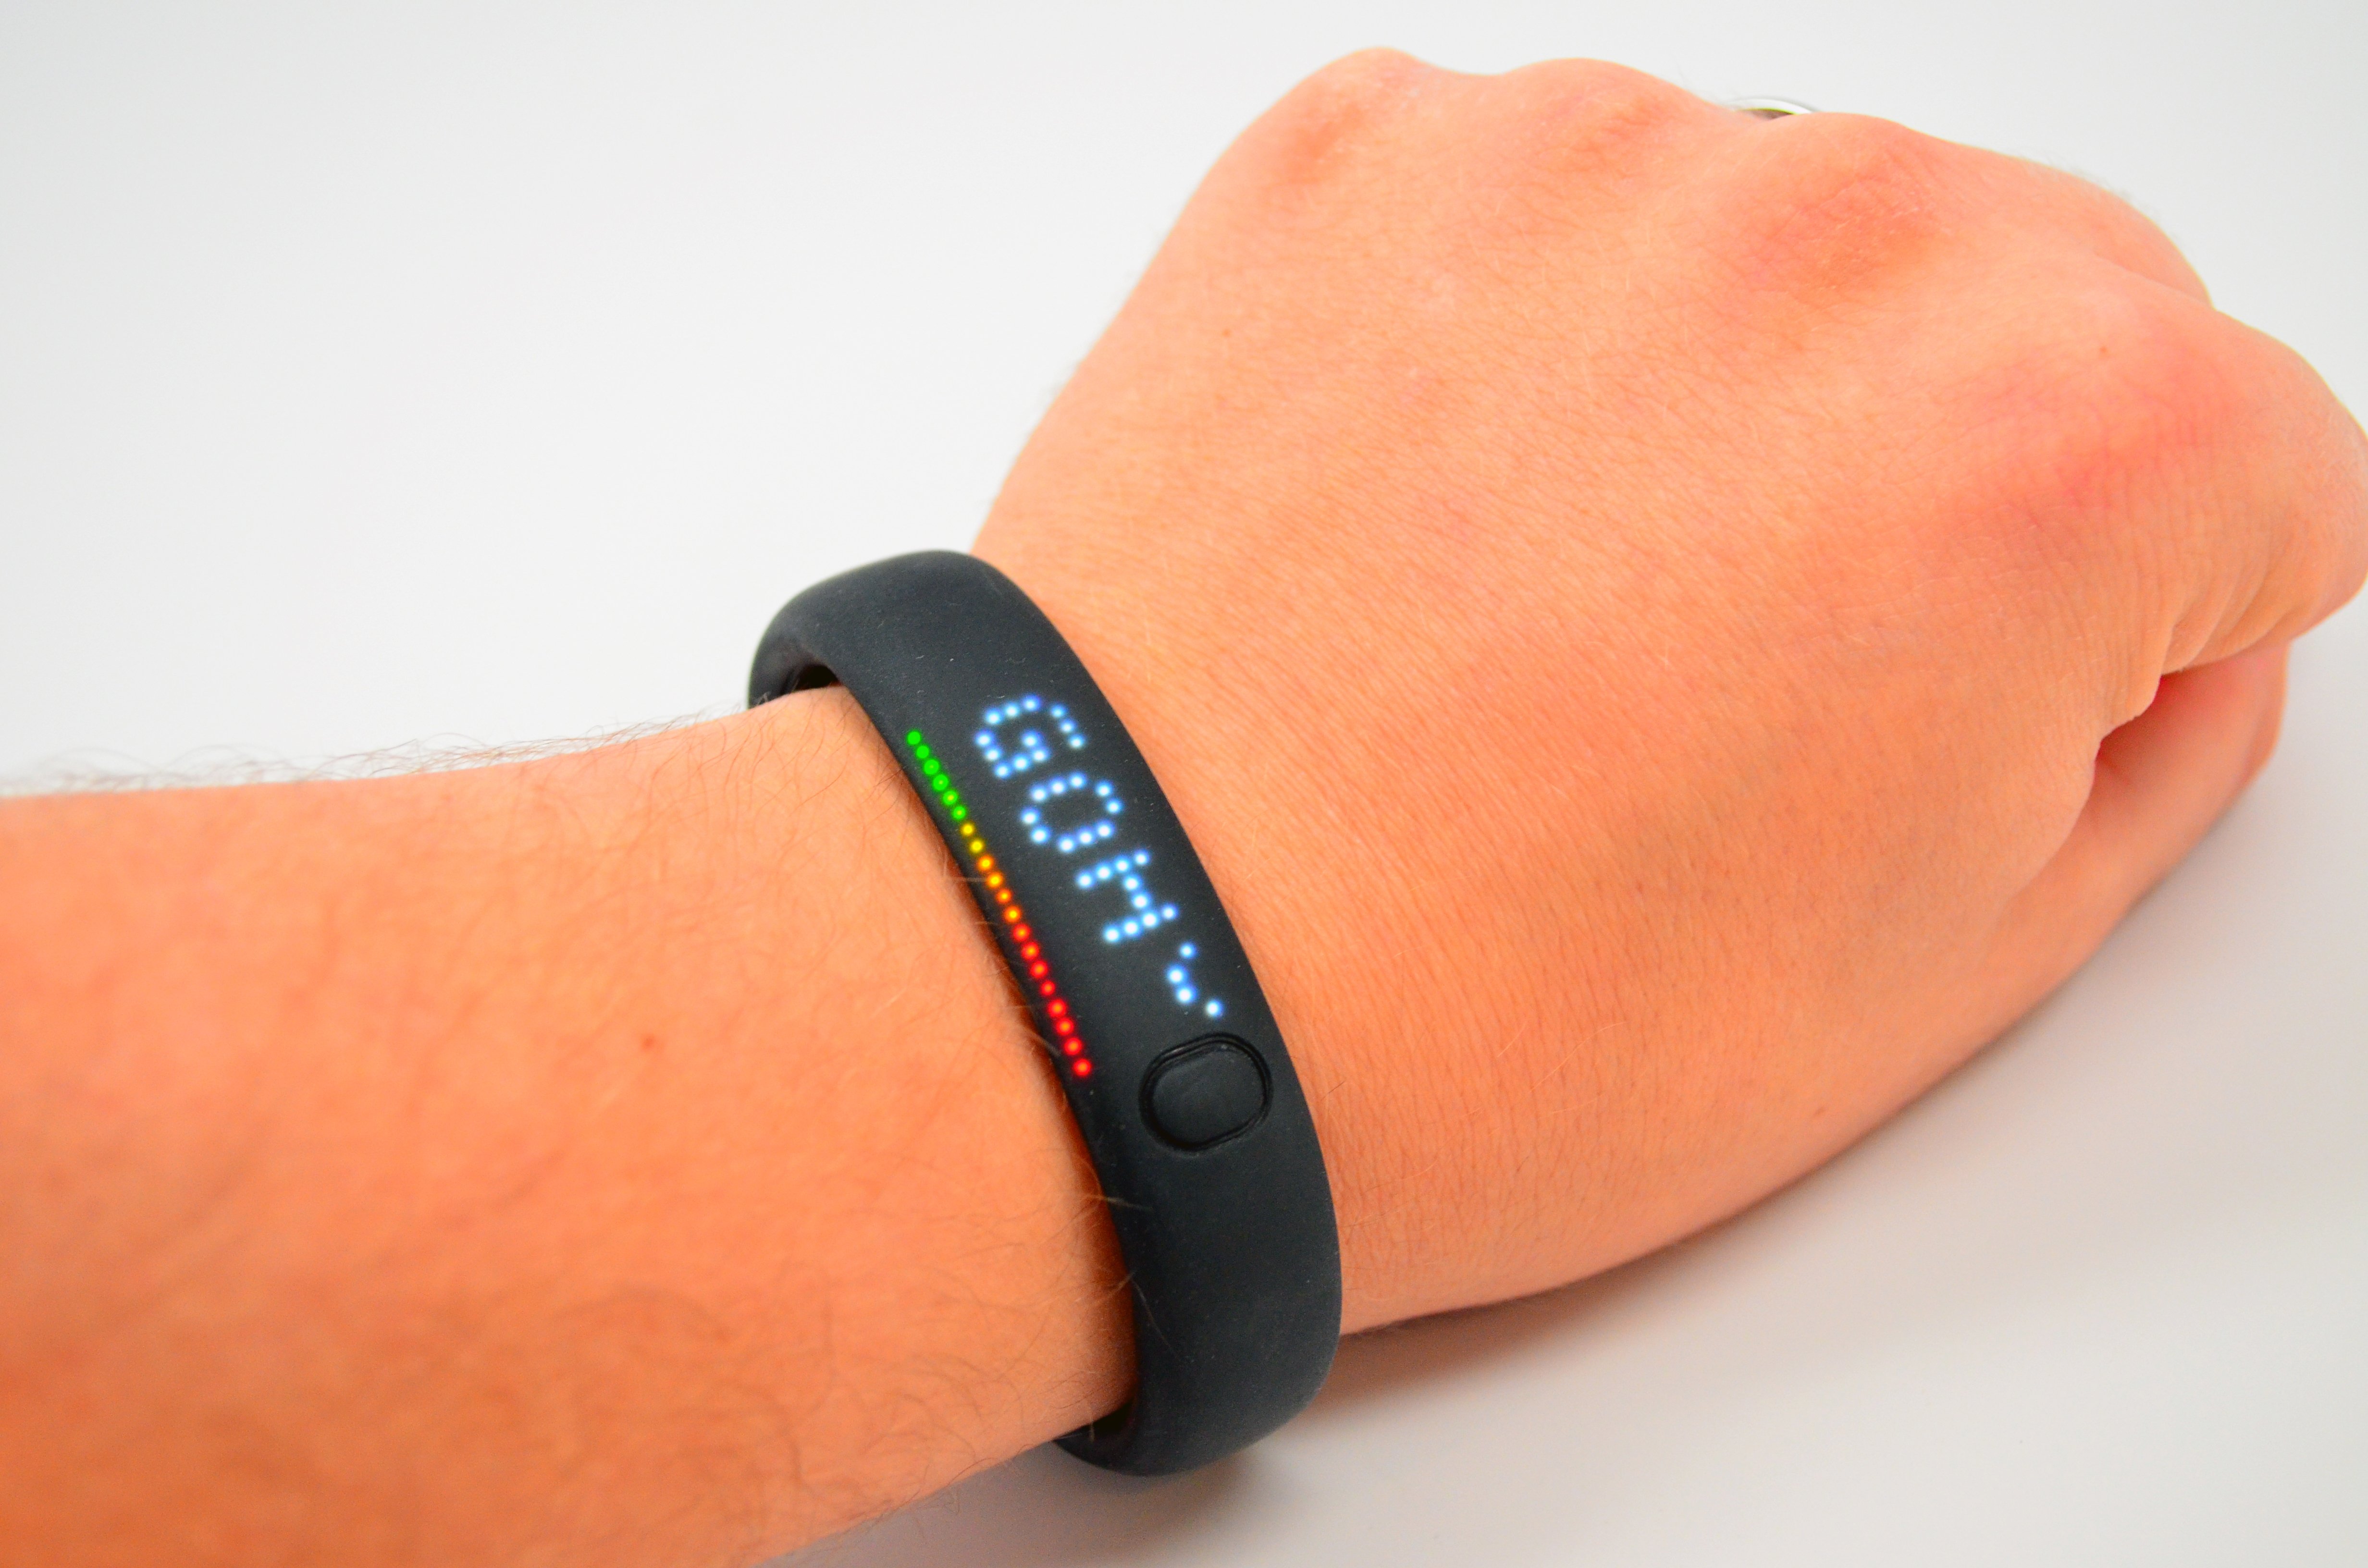 FuelBand 2: Heart Rate Monitor & Android Support Rumored